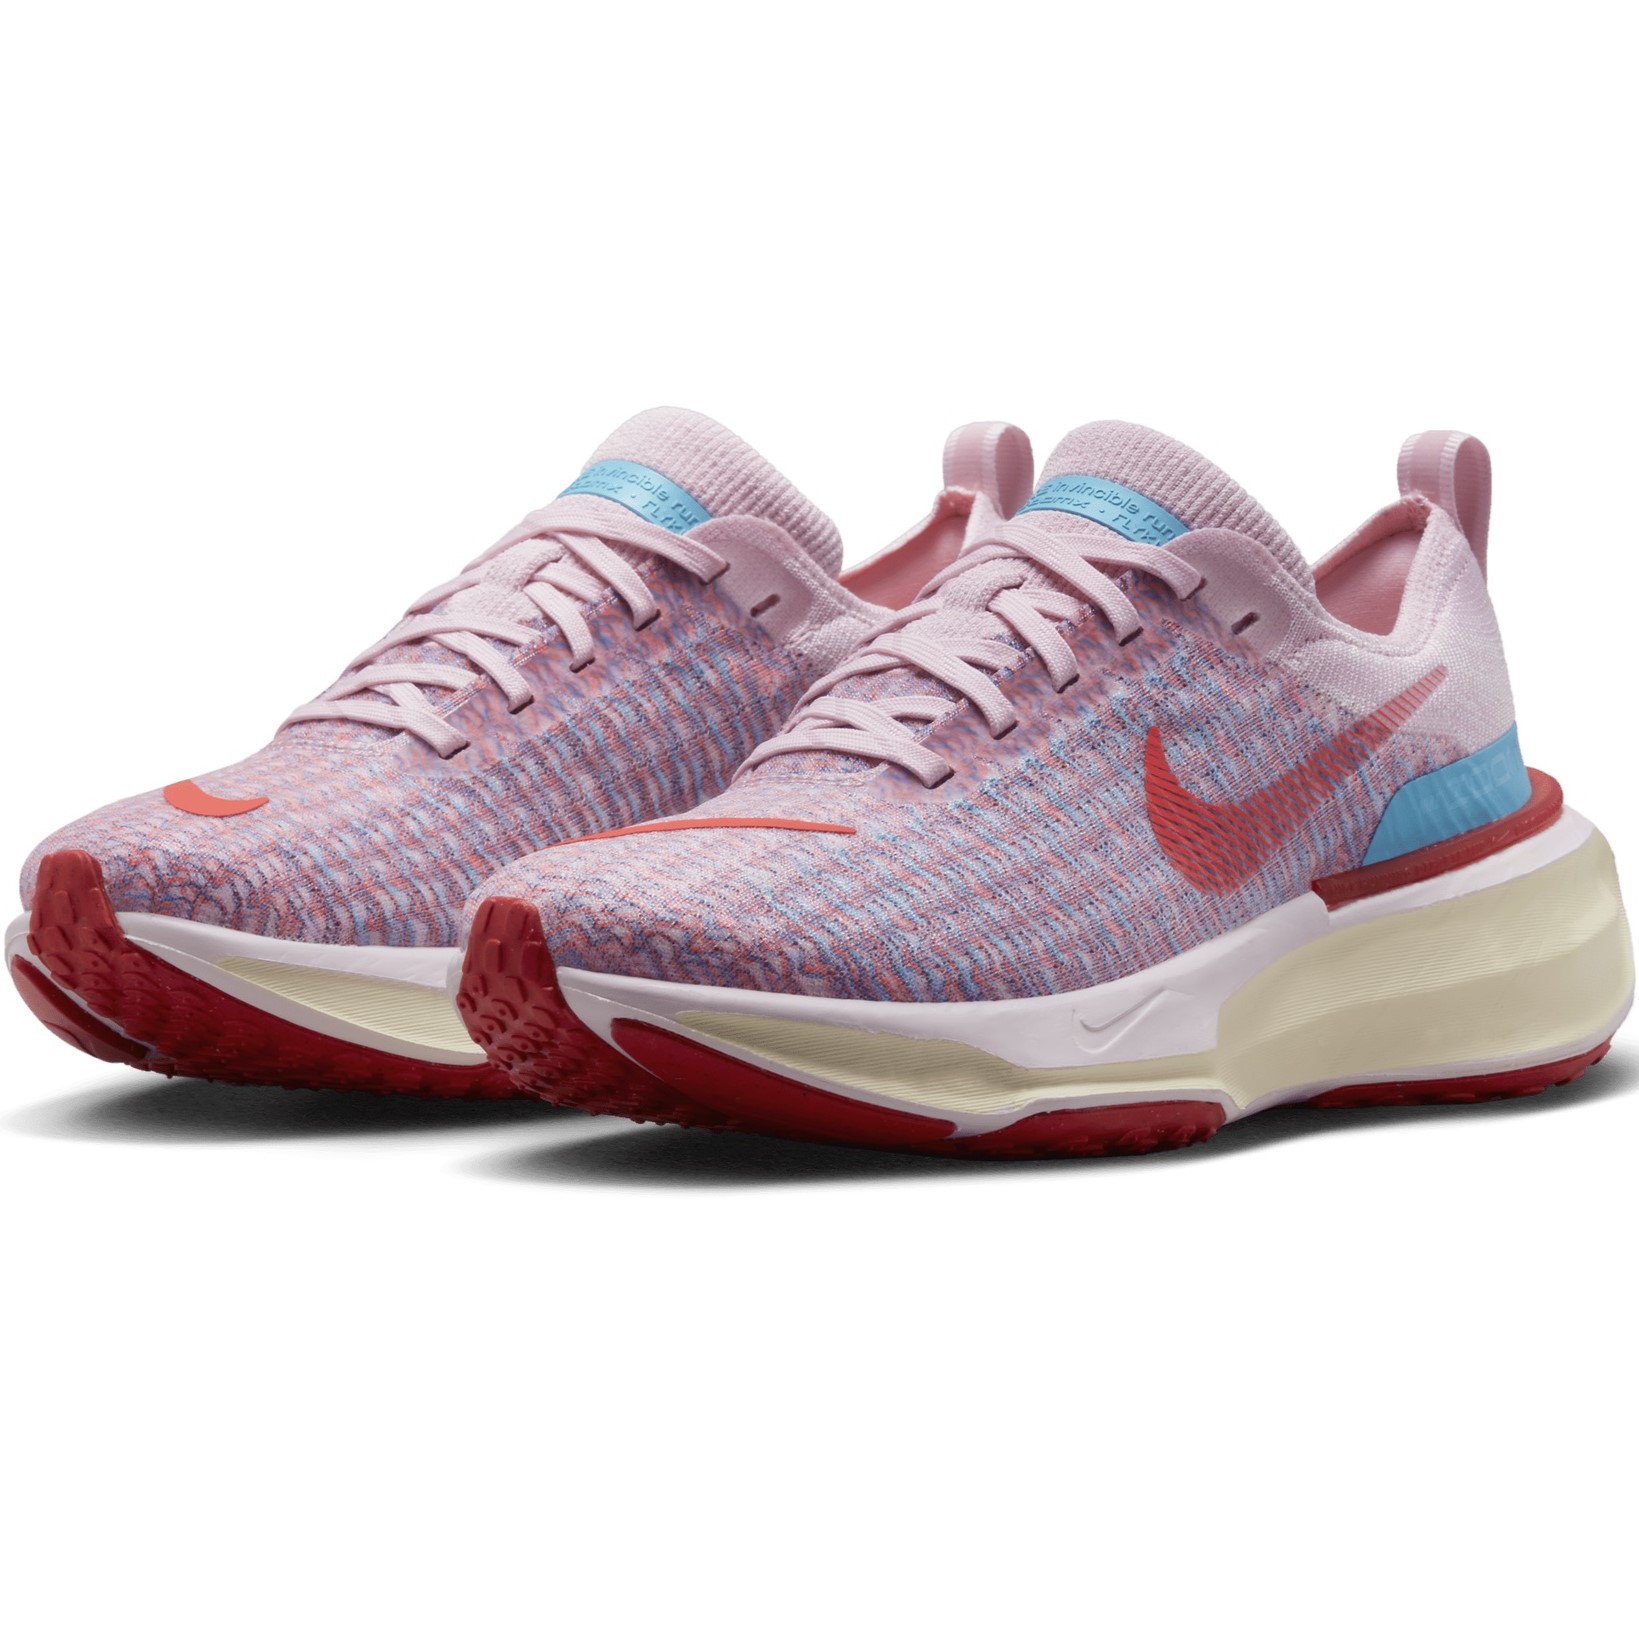 GIÀY NIKE NỮ WOMENS ZOOMX INVINCIBLE 3 ROAD RUNNING SHOES PINK FOAM RACER BLUE DR2660-600 4